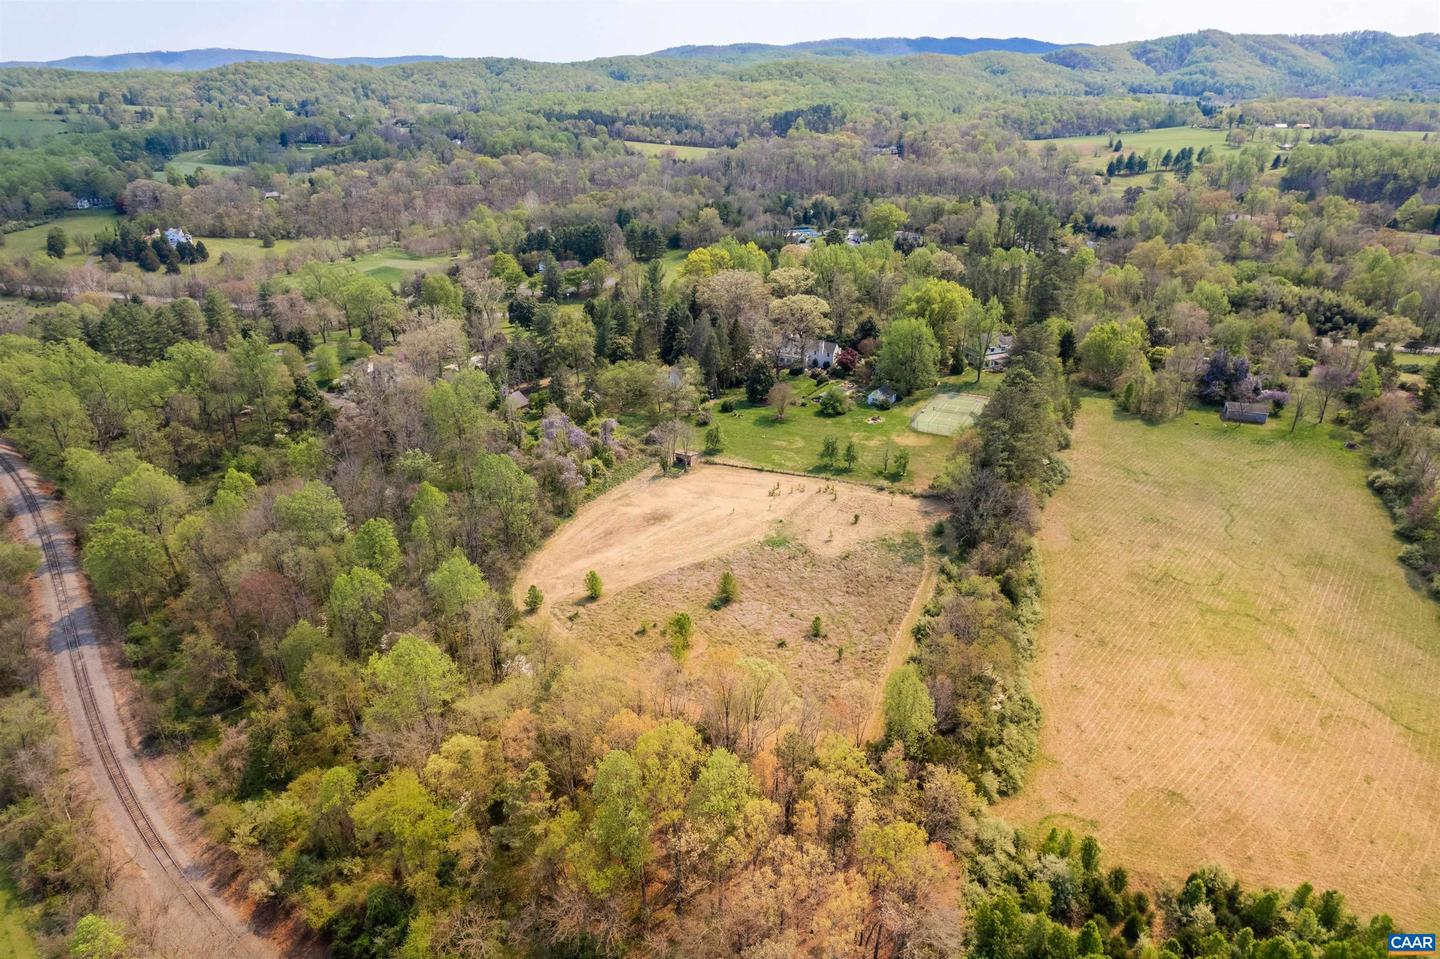 TBD IVY RD, CHARLOTTESVILLE, Virginia 22903, ,Land,For sale,TBD IVY RD,651688 MLS # 651688